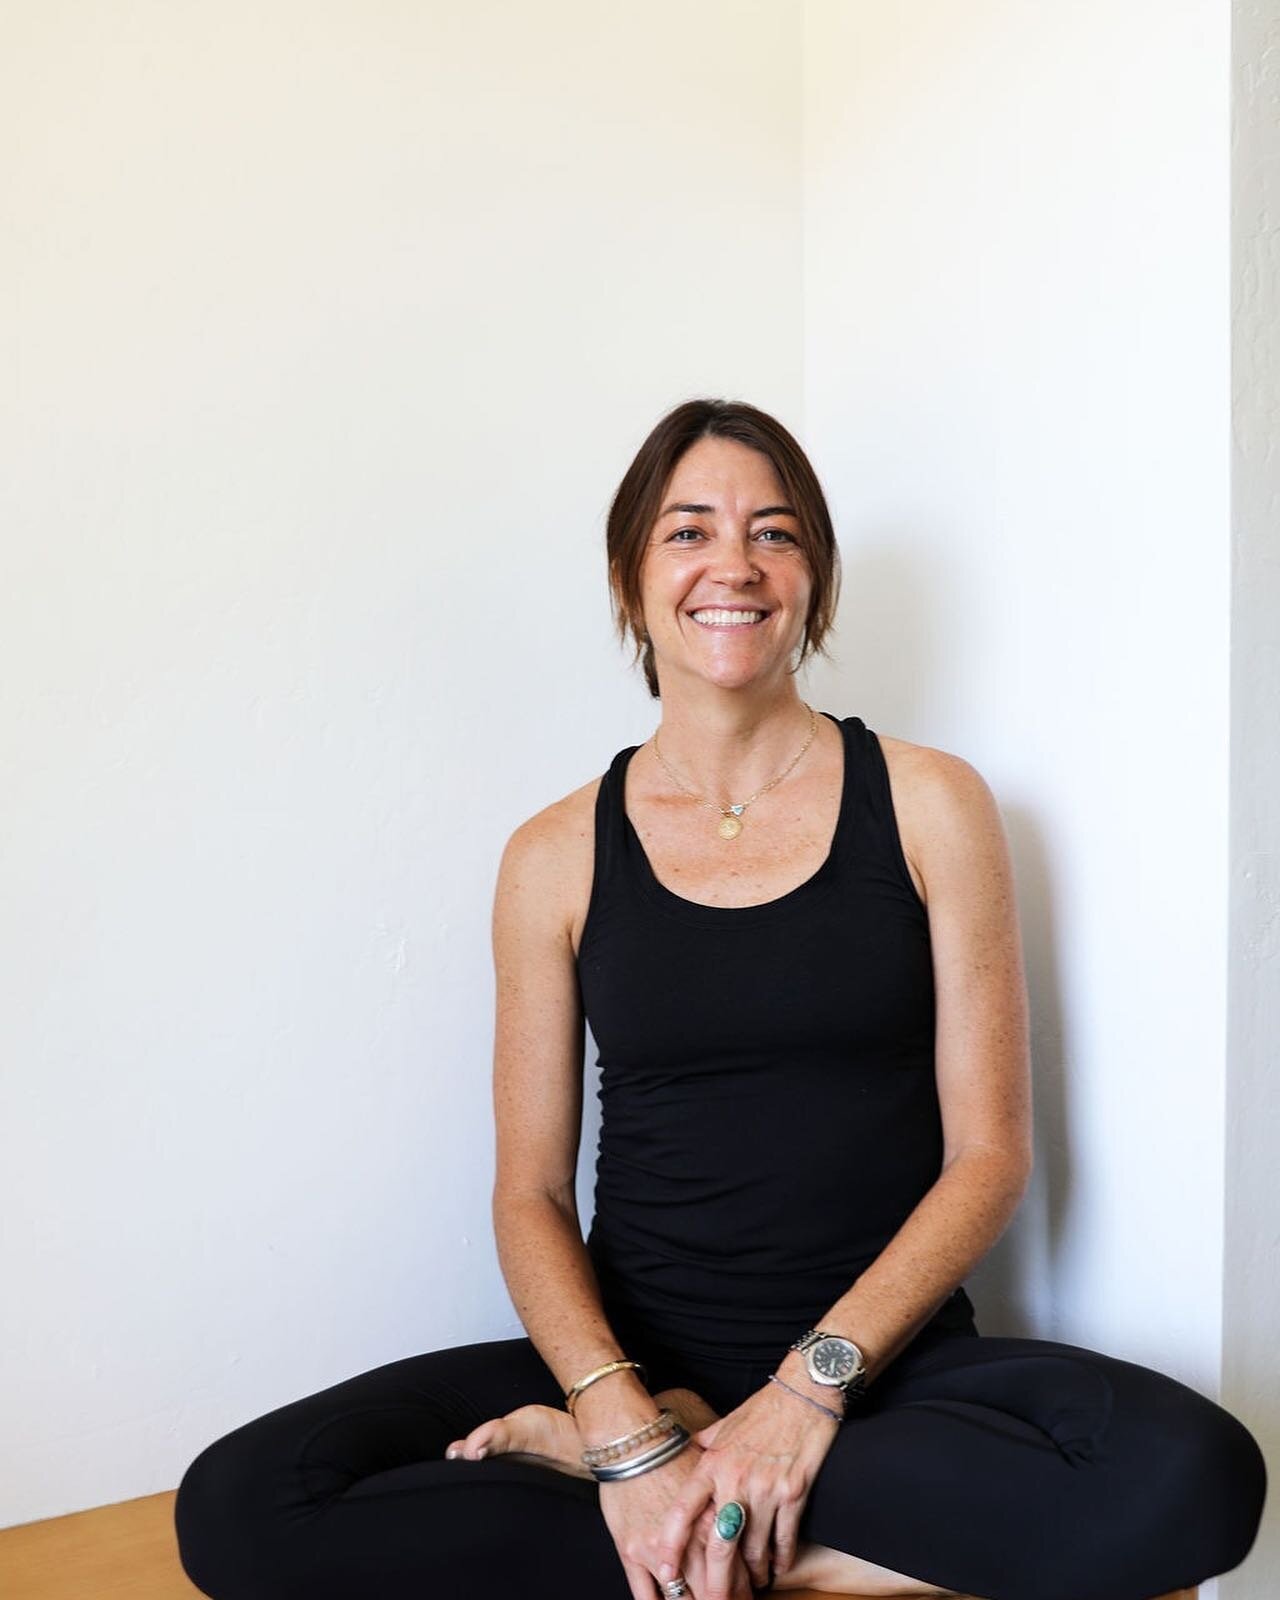 Friendly reminder to reserve your spot in Walla and arrive early if possible for Friday's 9:30 am practice with Anna Hughes! This class has become very popular, and we want to accommodate as many yogis in our community as possible. Thanks for your un